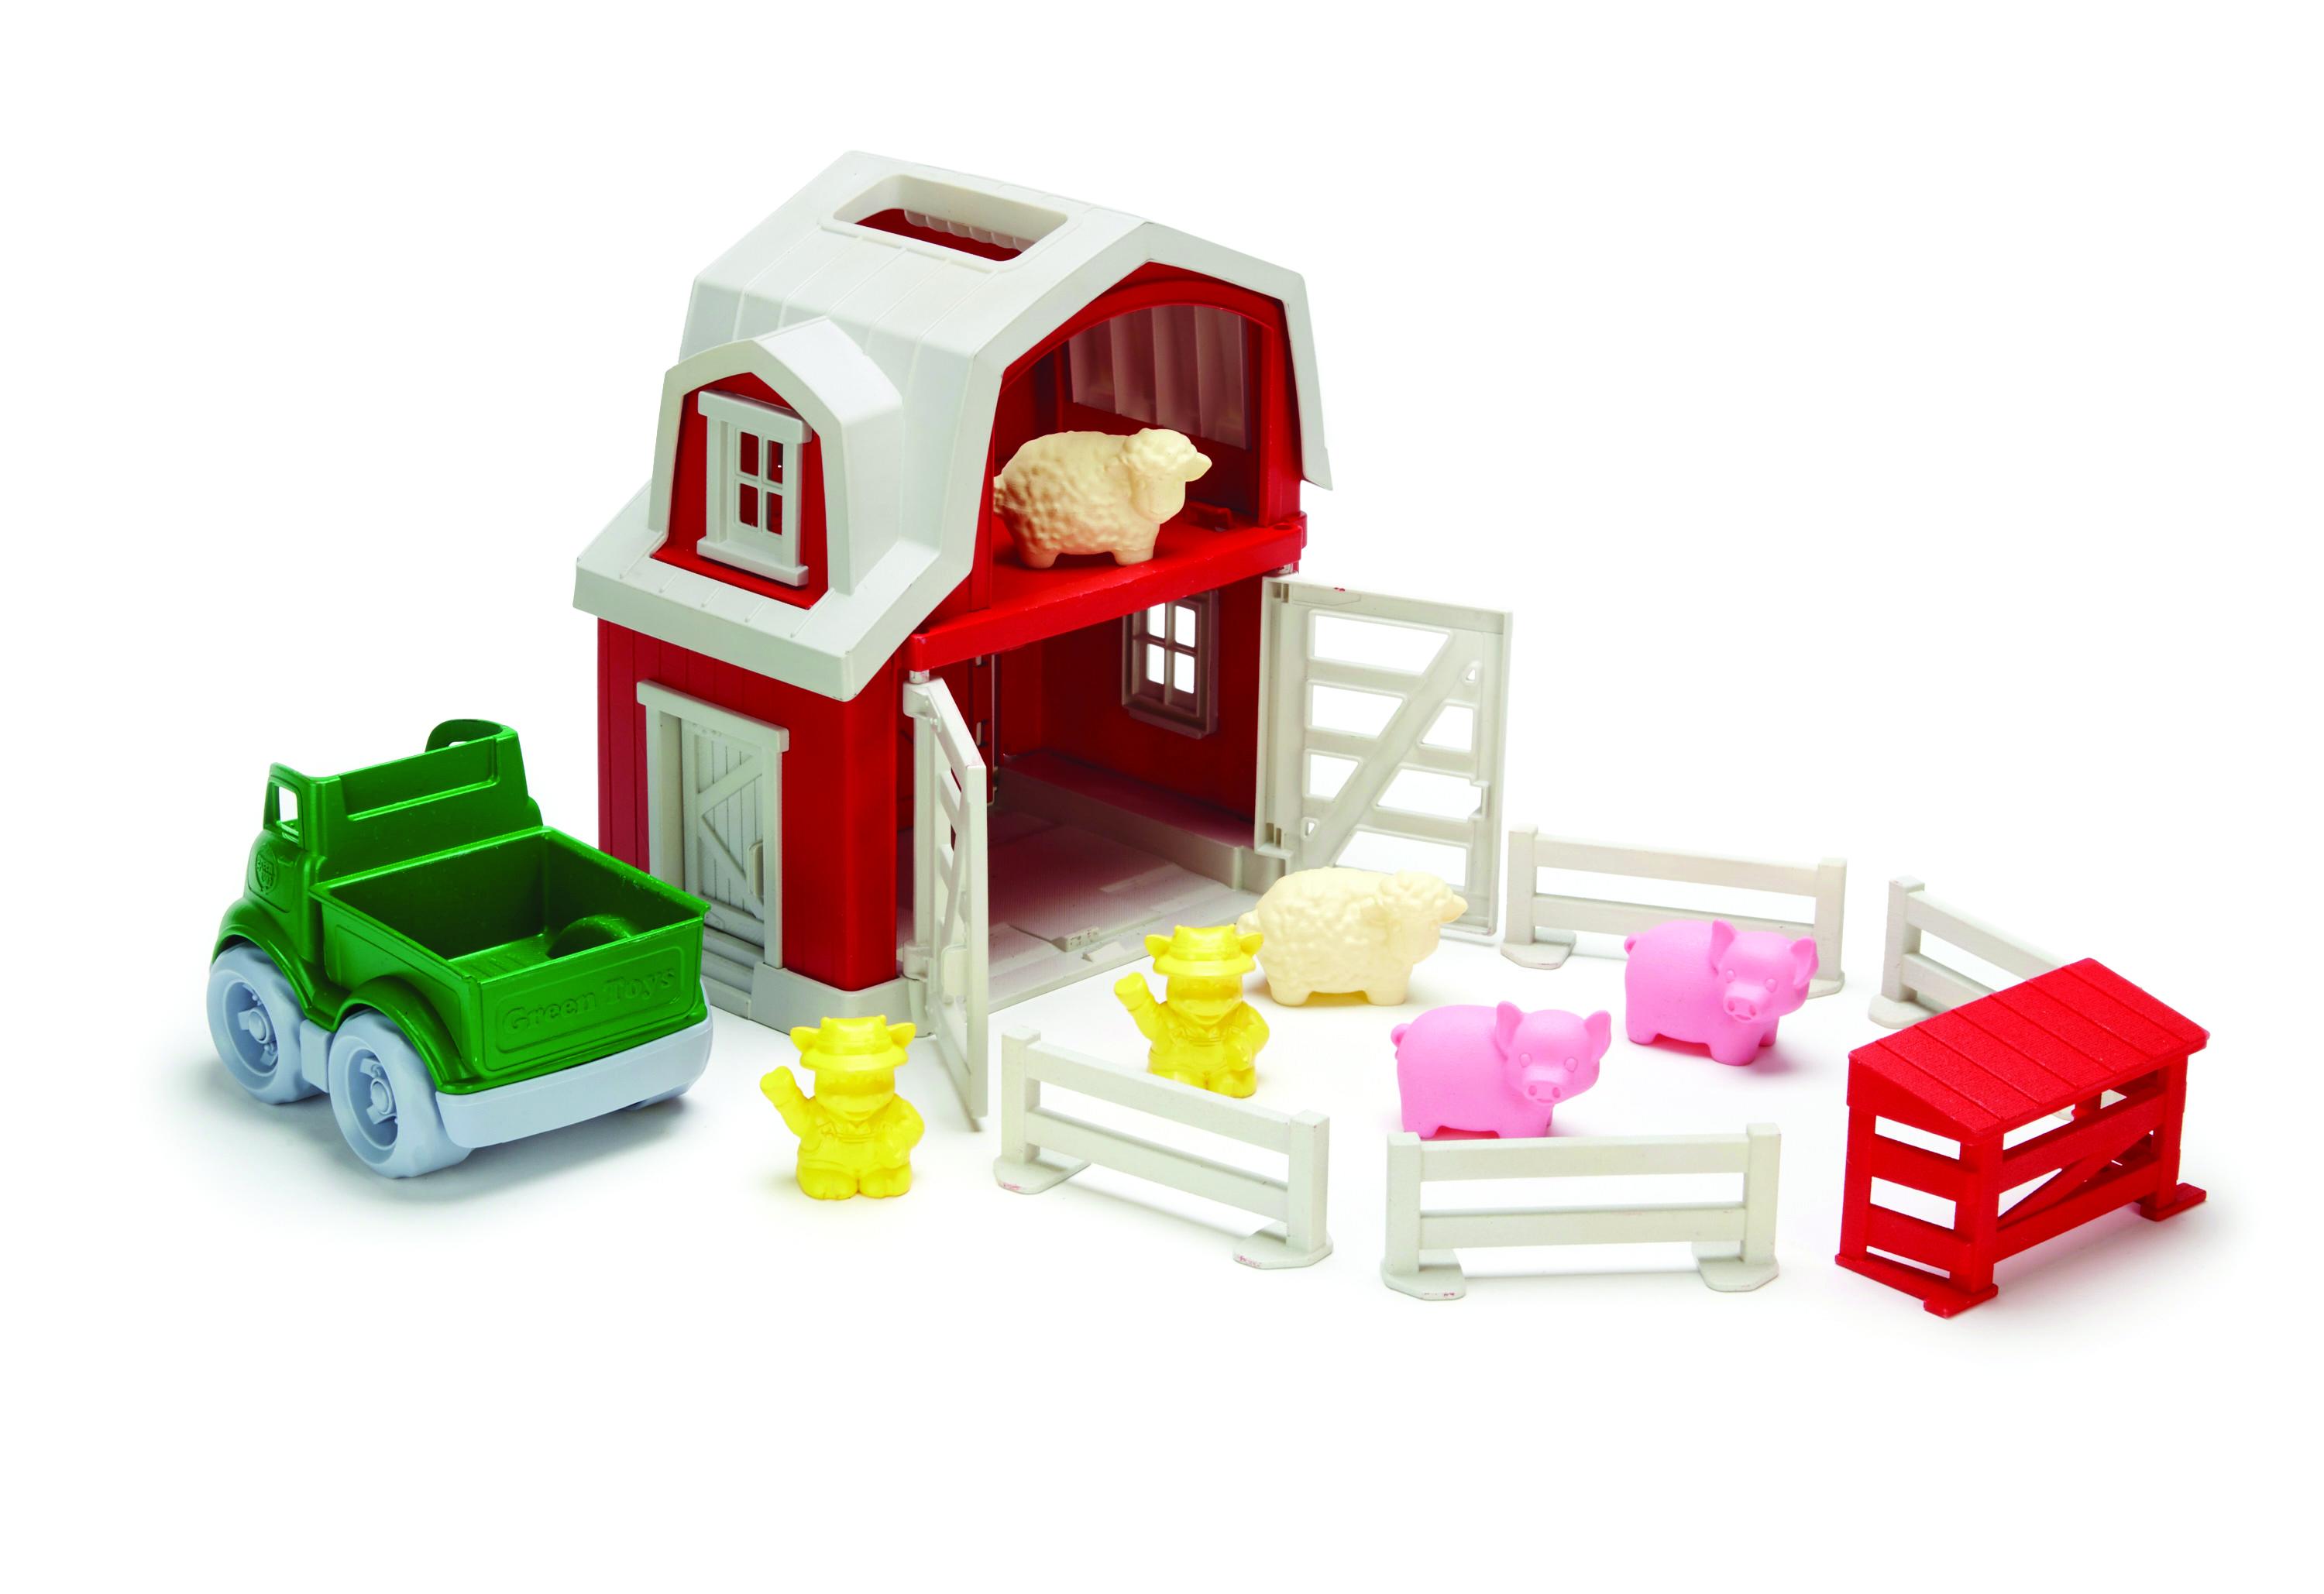 Red plastic farmhouse with fence pieces, farm animals and a green farm pick-up truck.